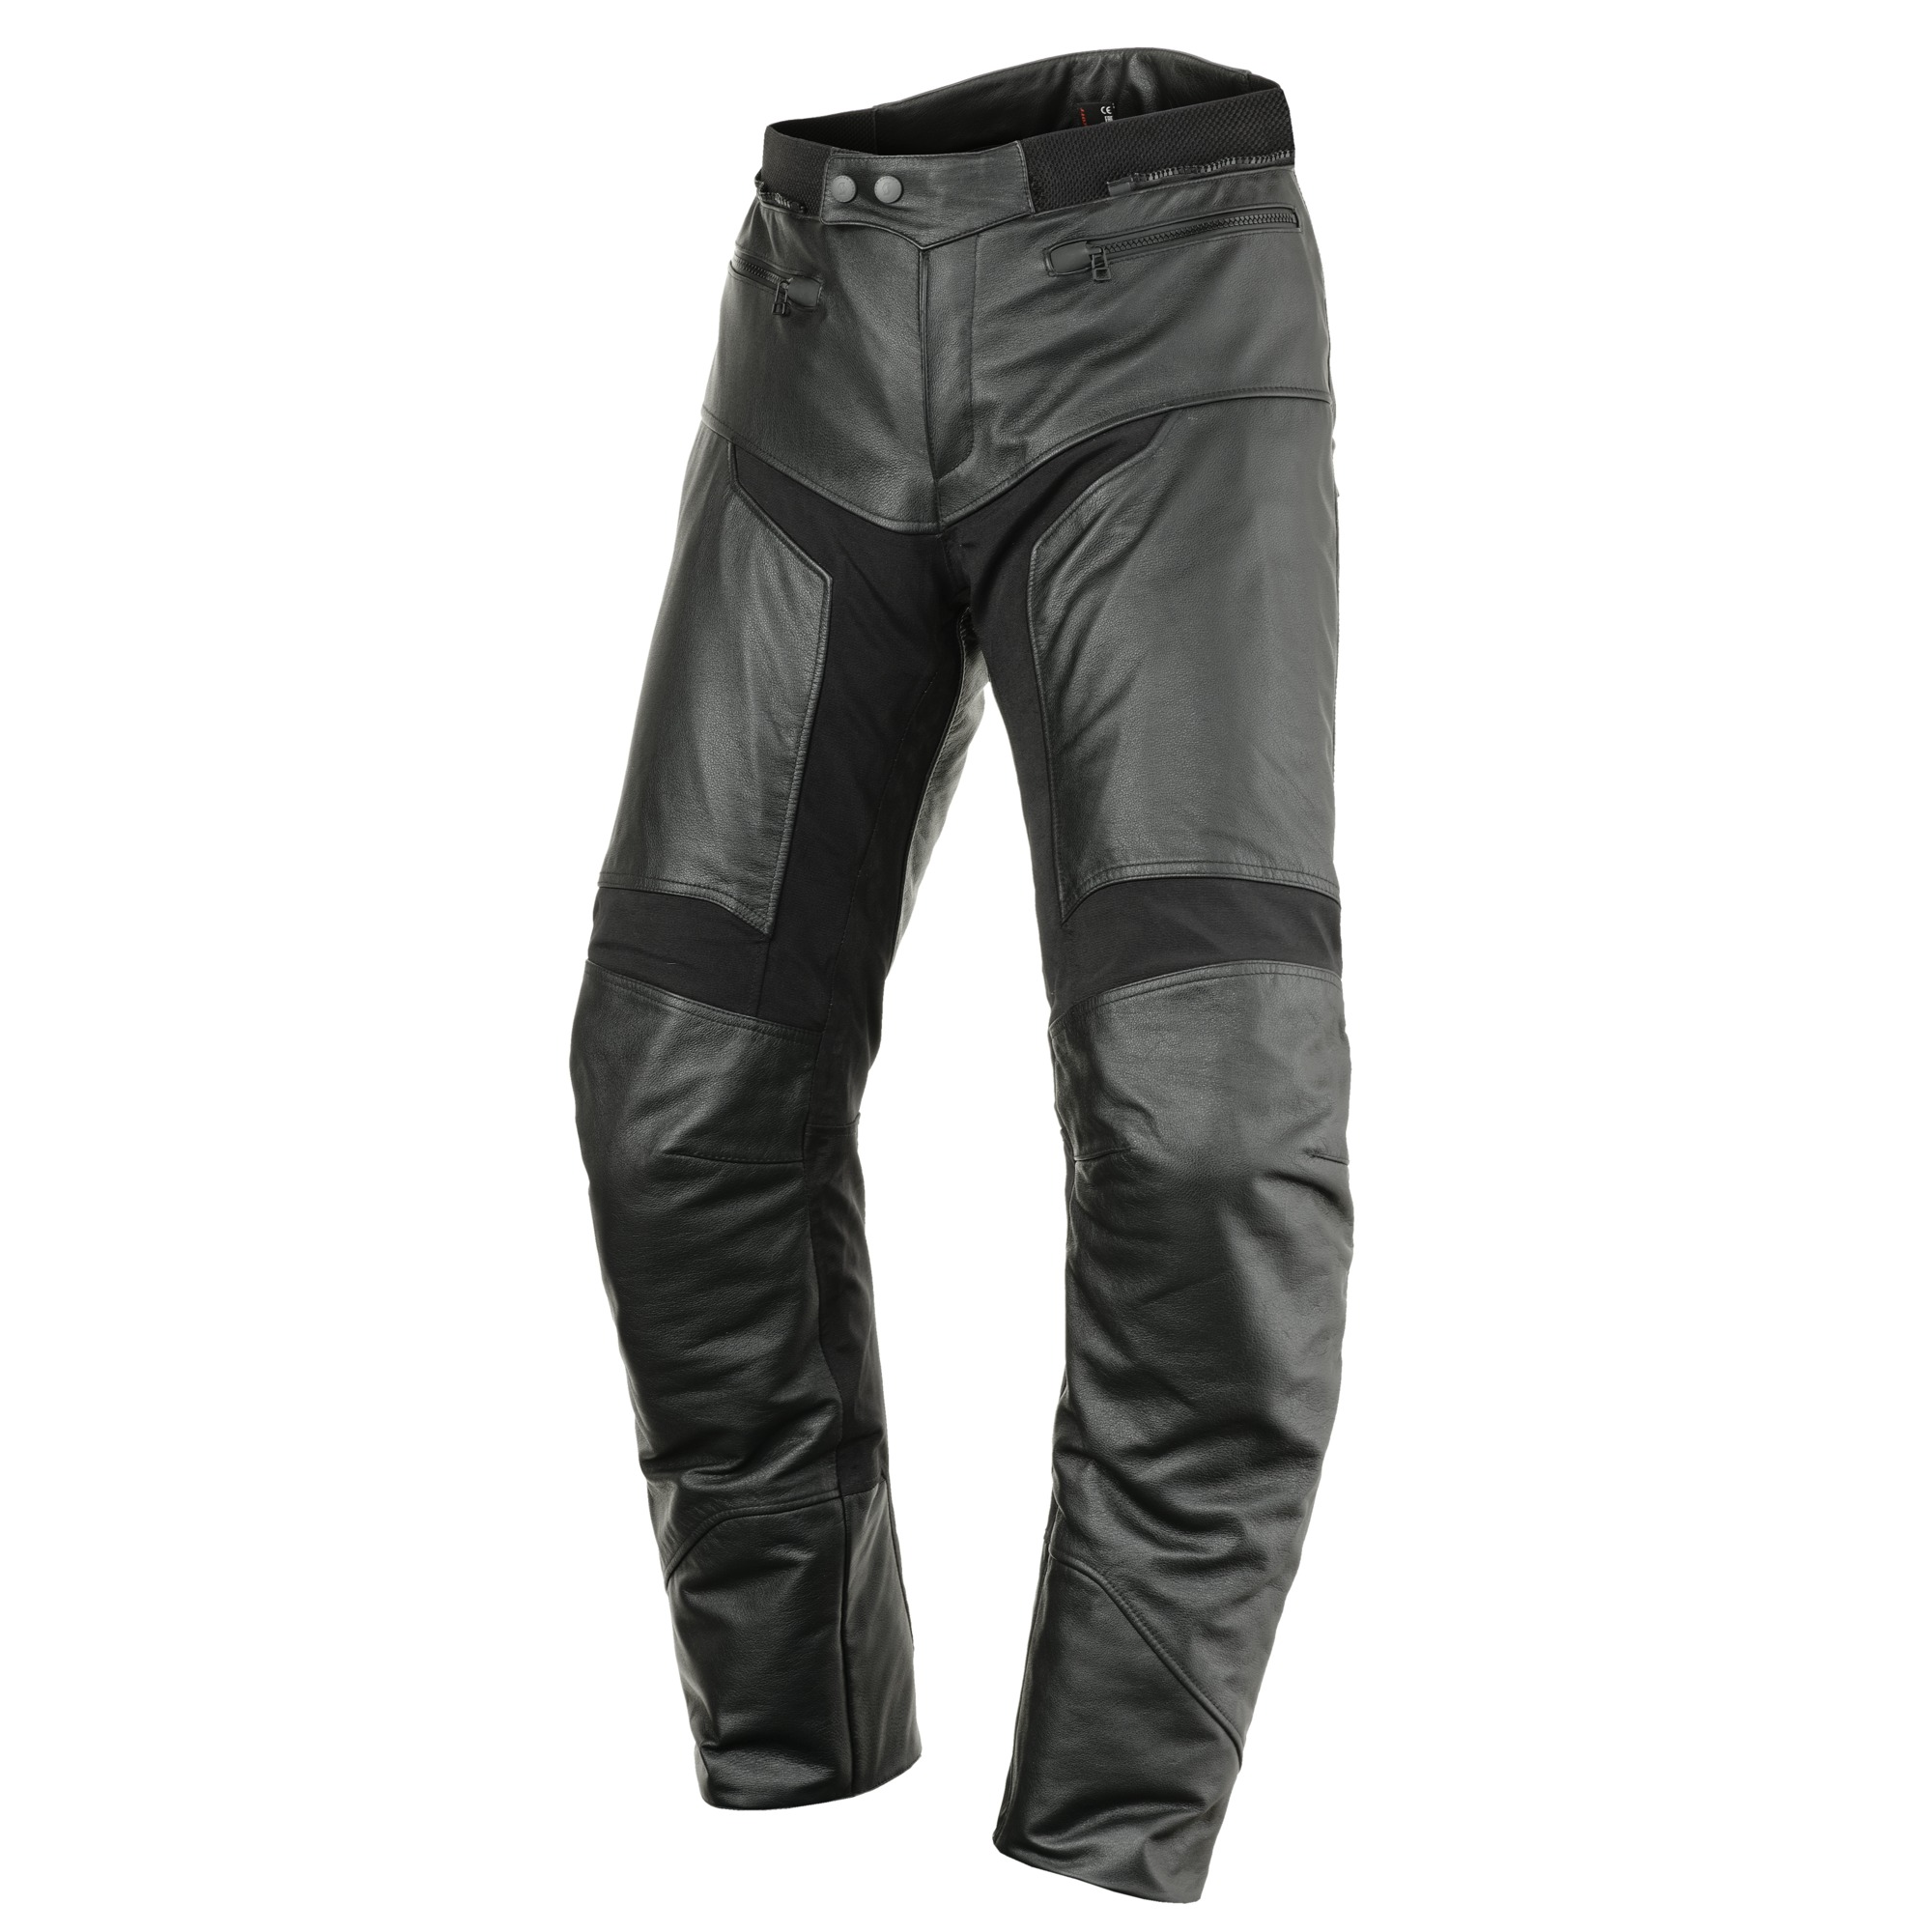 Details 90+ leather motorcycle trousers super hot - in.cdgdbentre